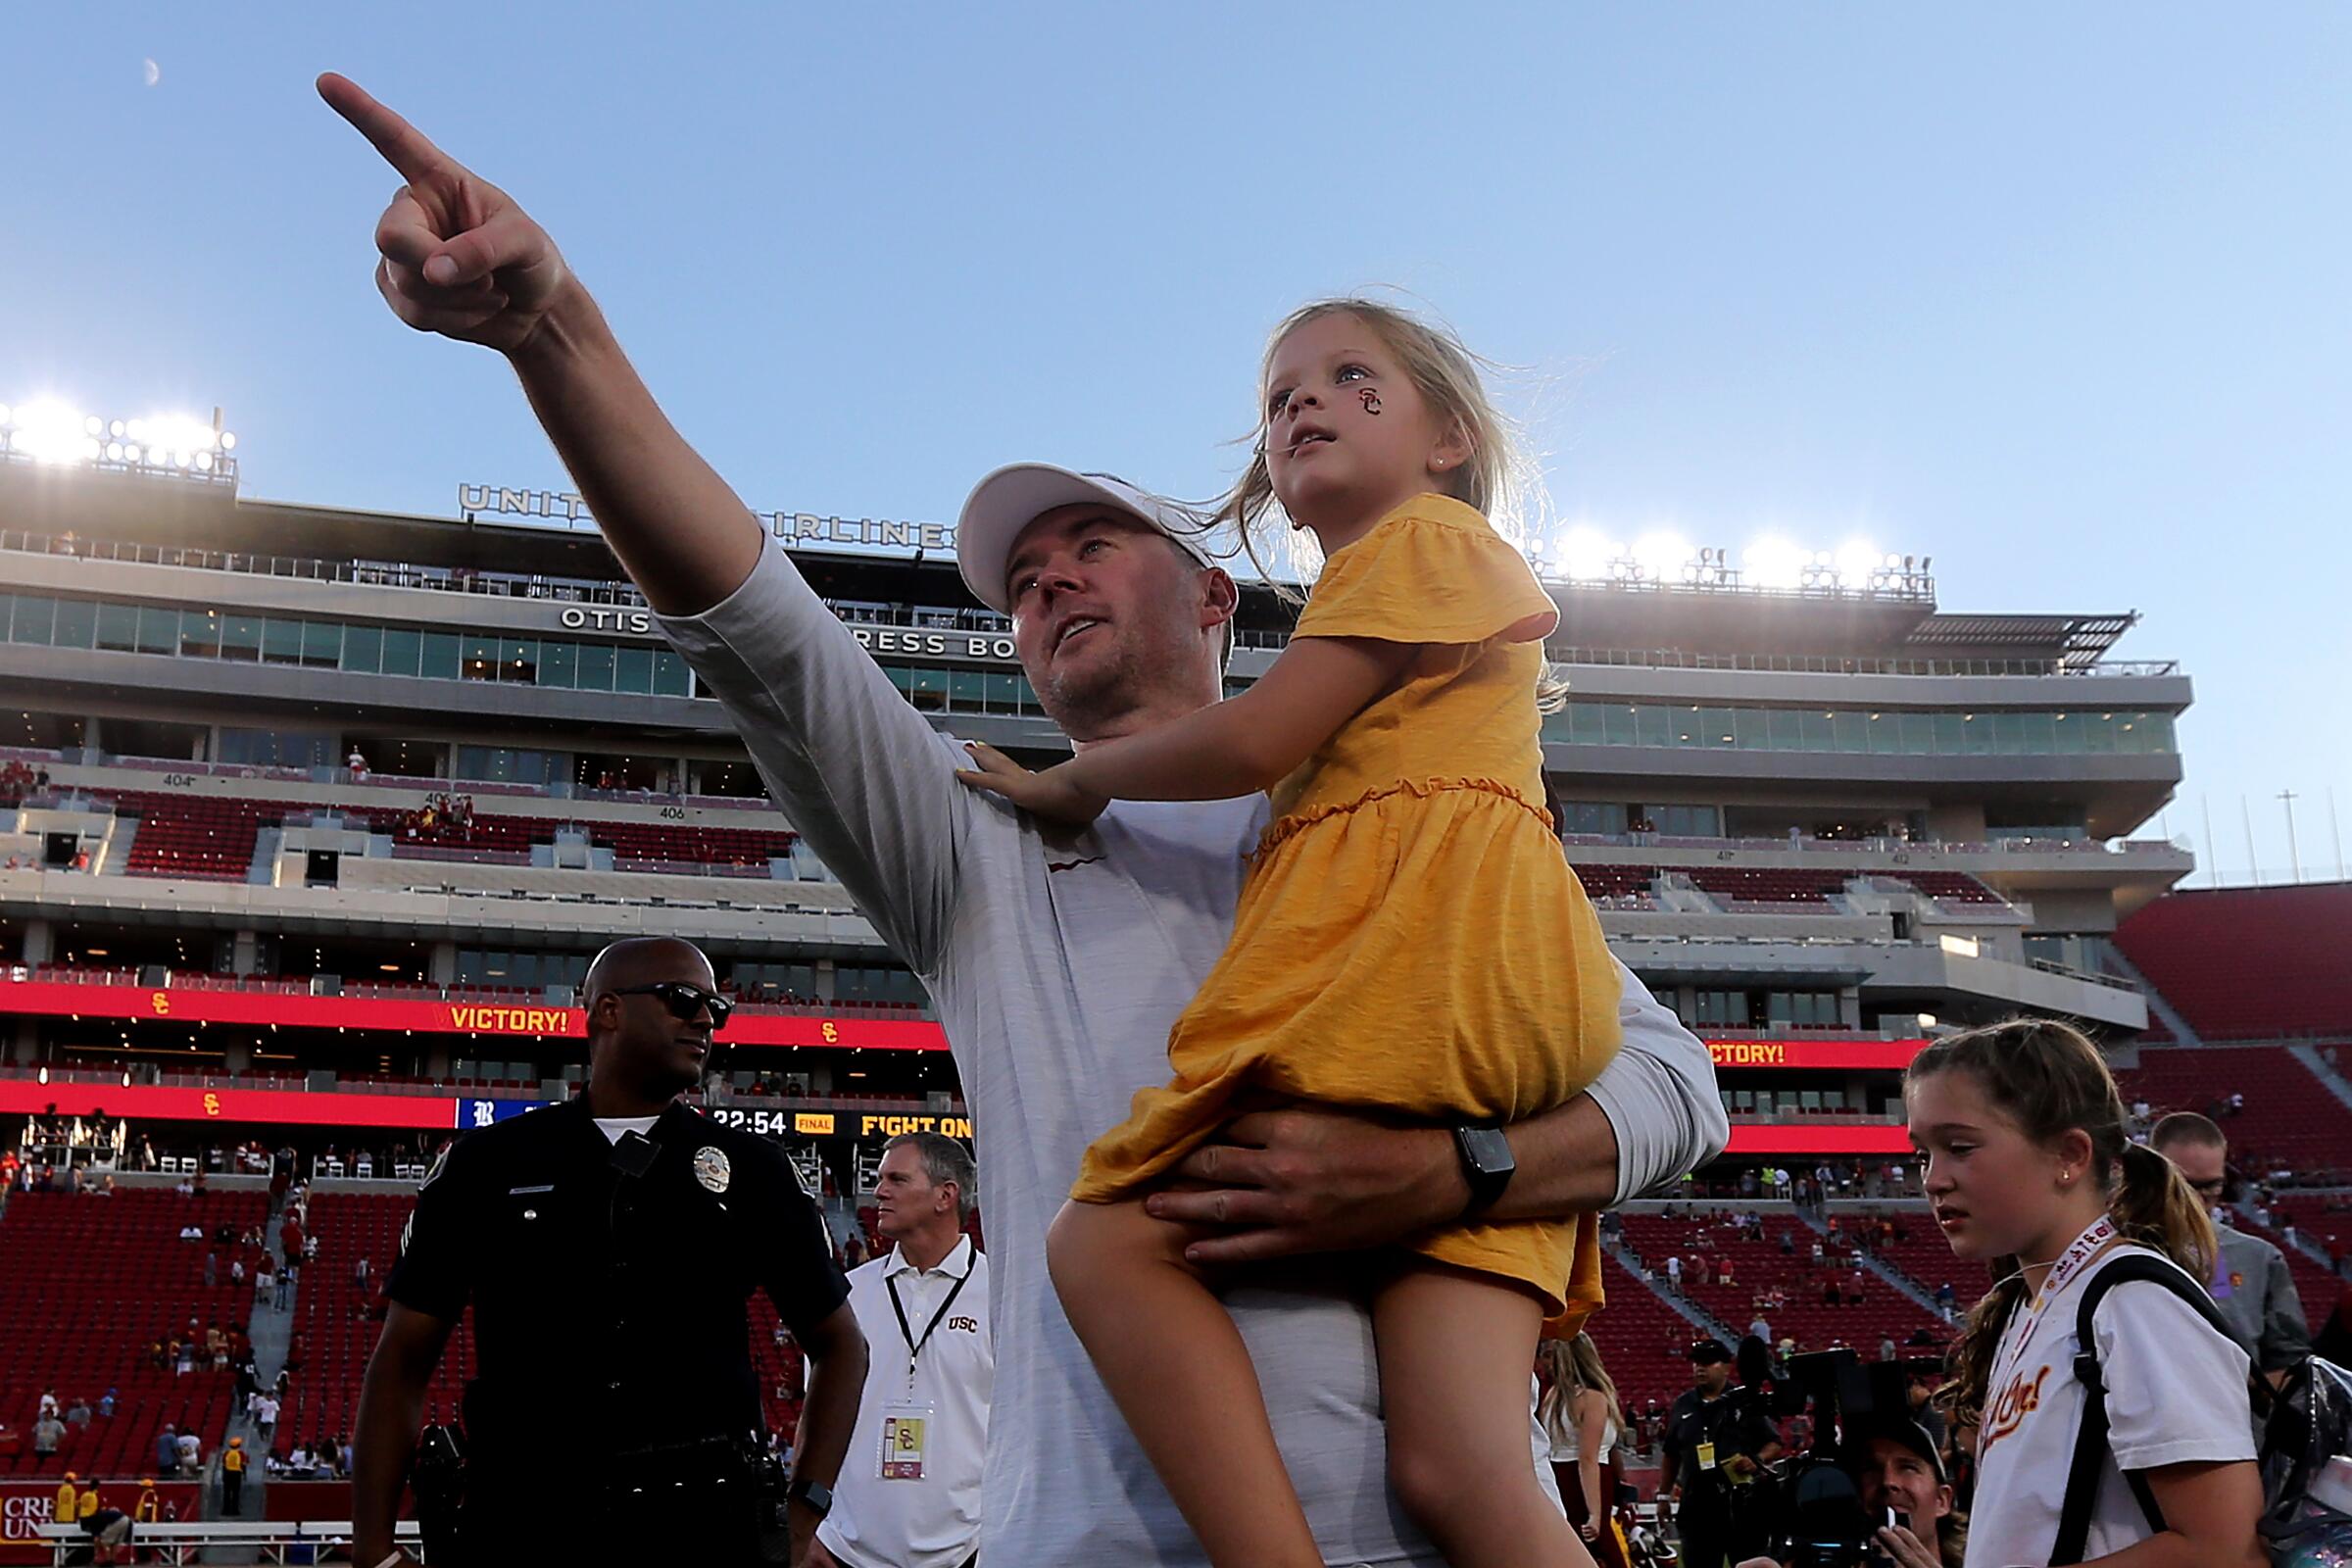 USC coach Lincoln Riley celebrates with his daughter after the Trojans' 66-14 victory over Rice.